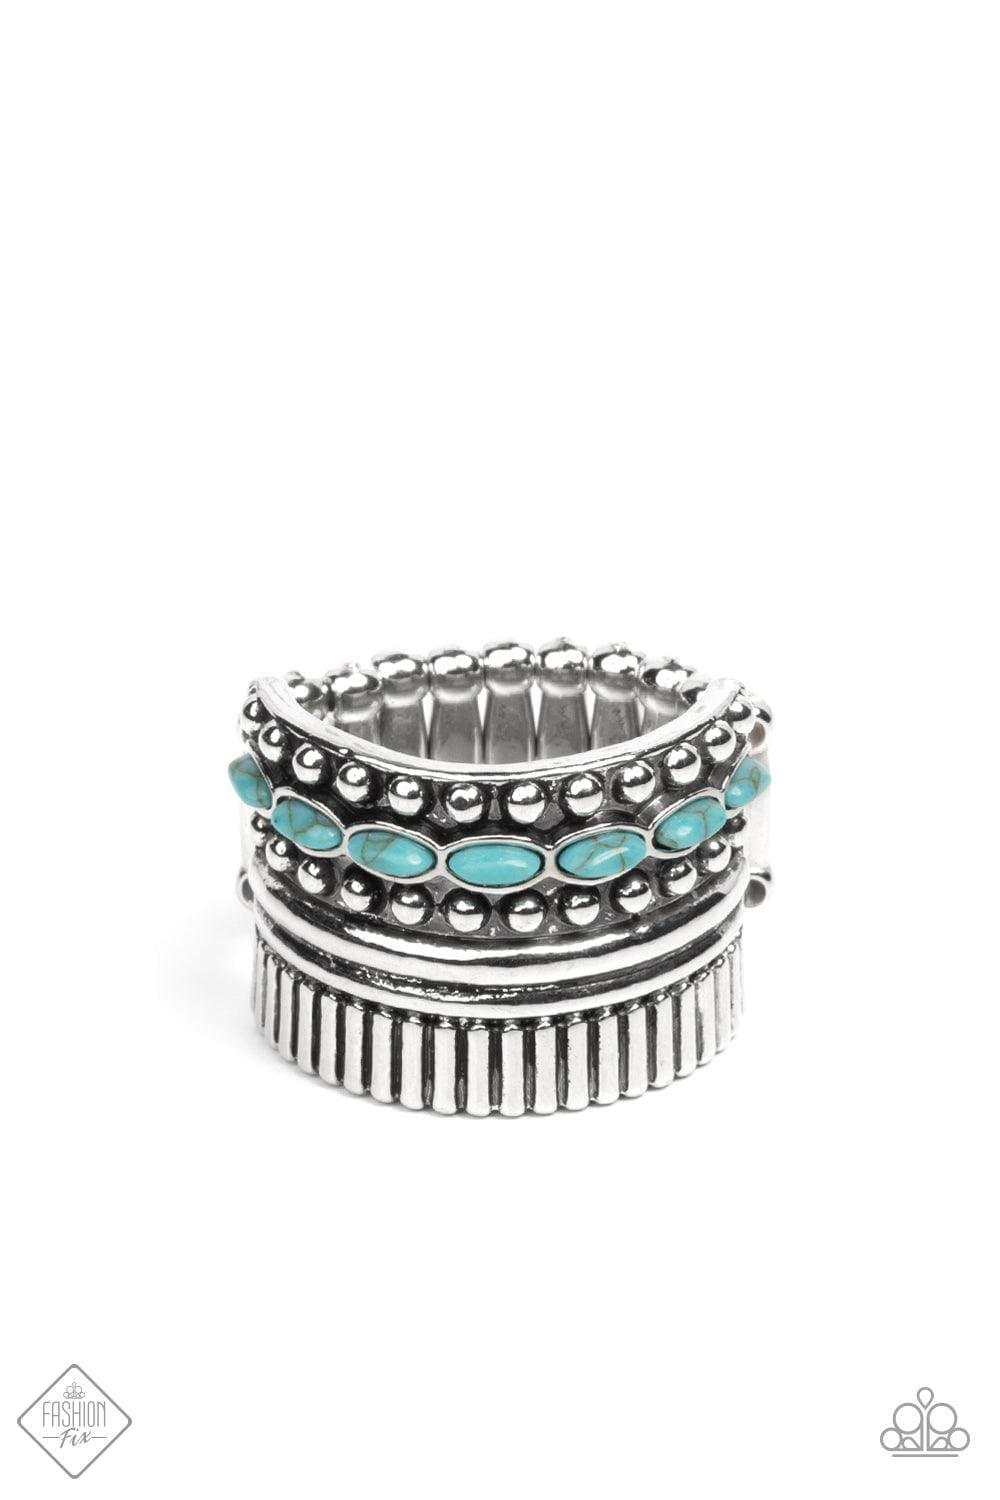 Paparazzi Accessories - Local Flavor - Blue Ring - Bling by JessieK